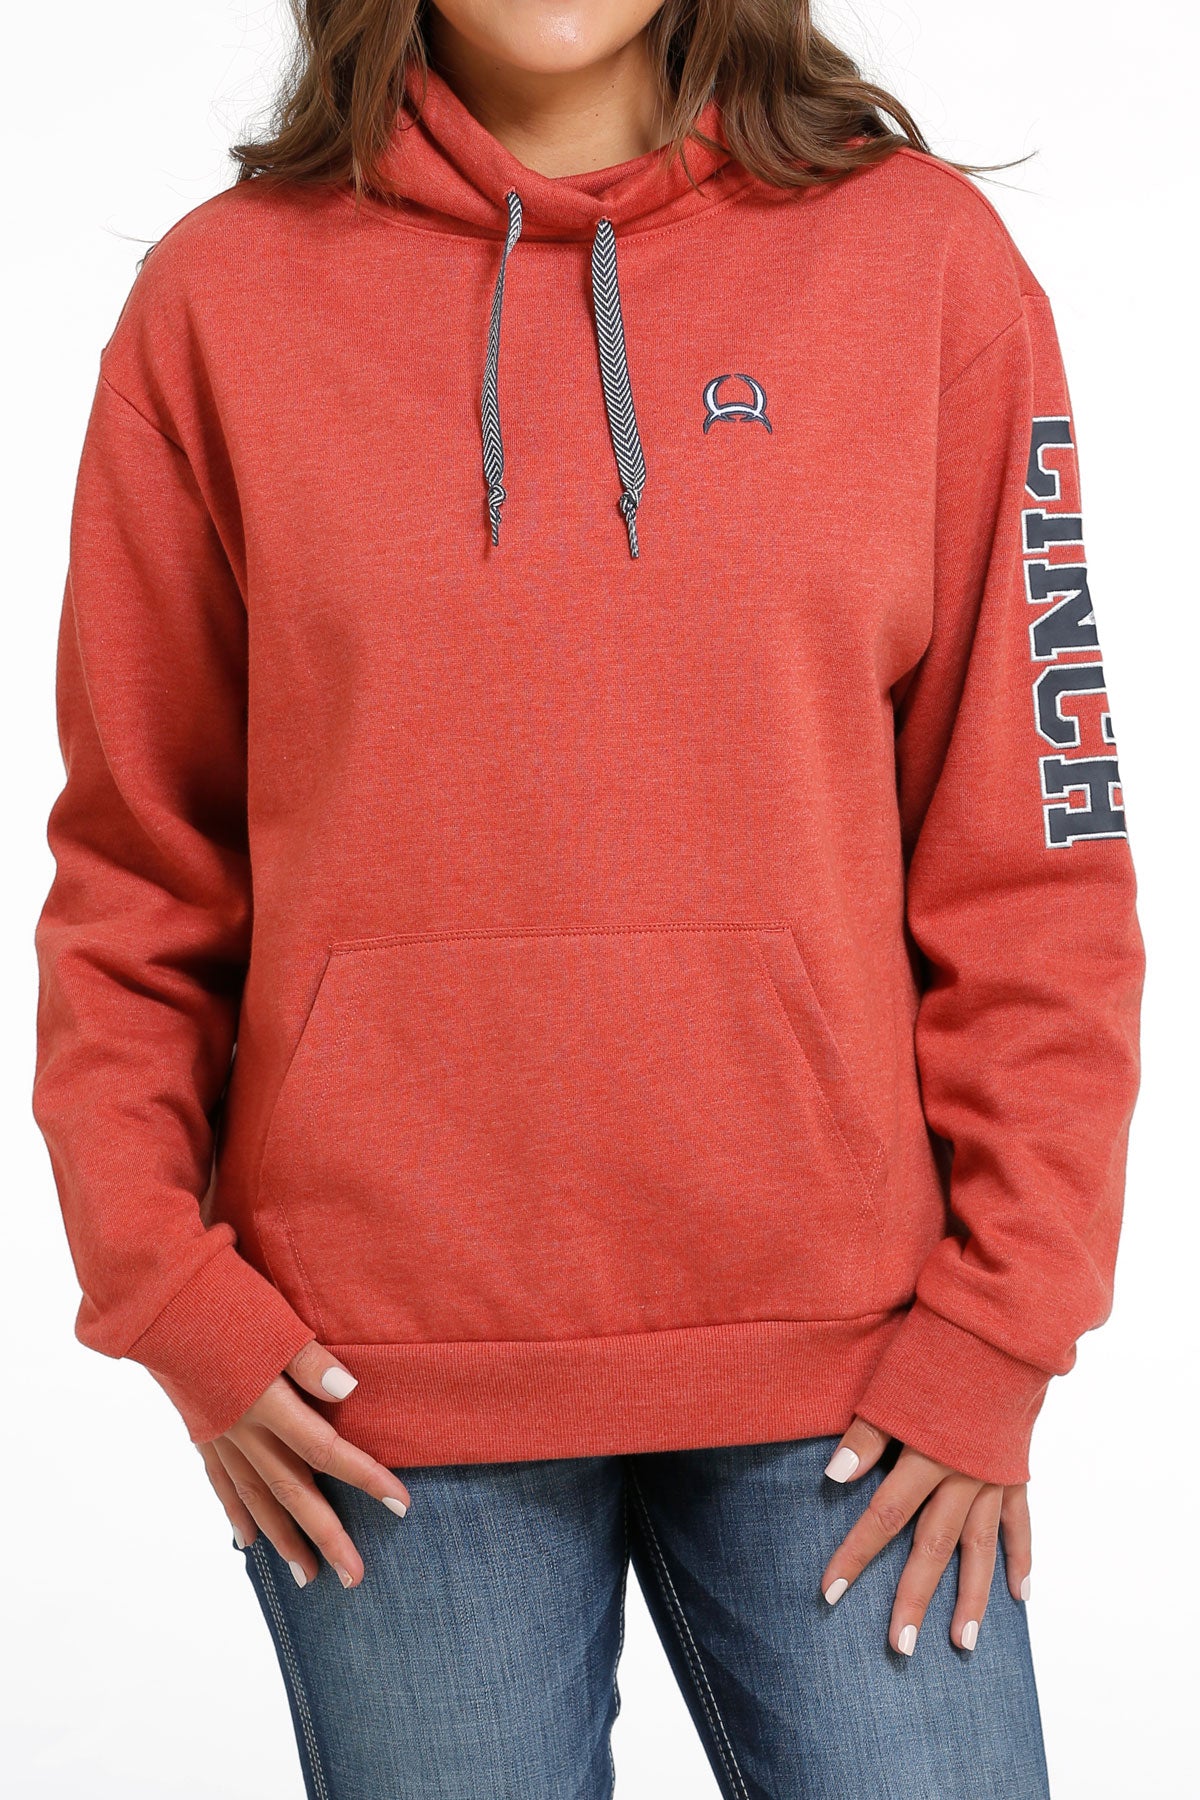 Women's Cinch Pullover - Heather Red